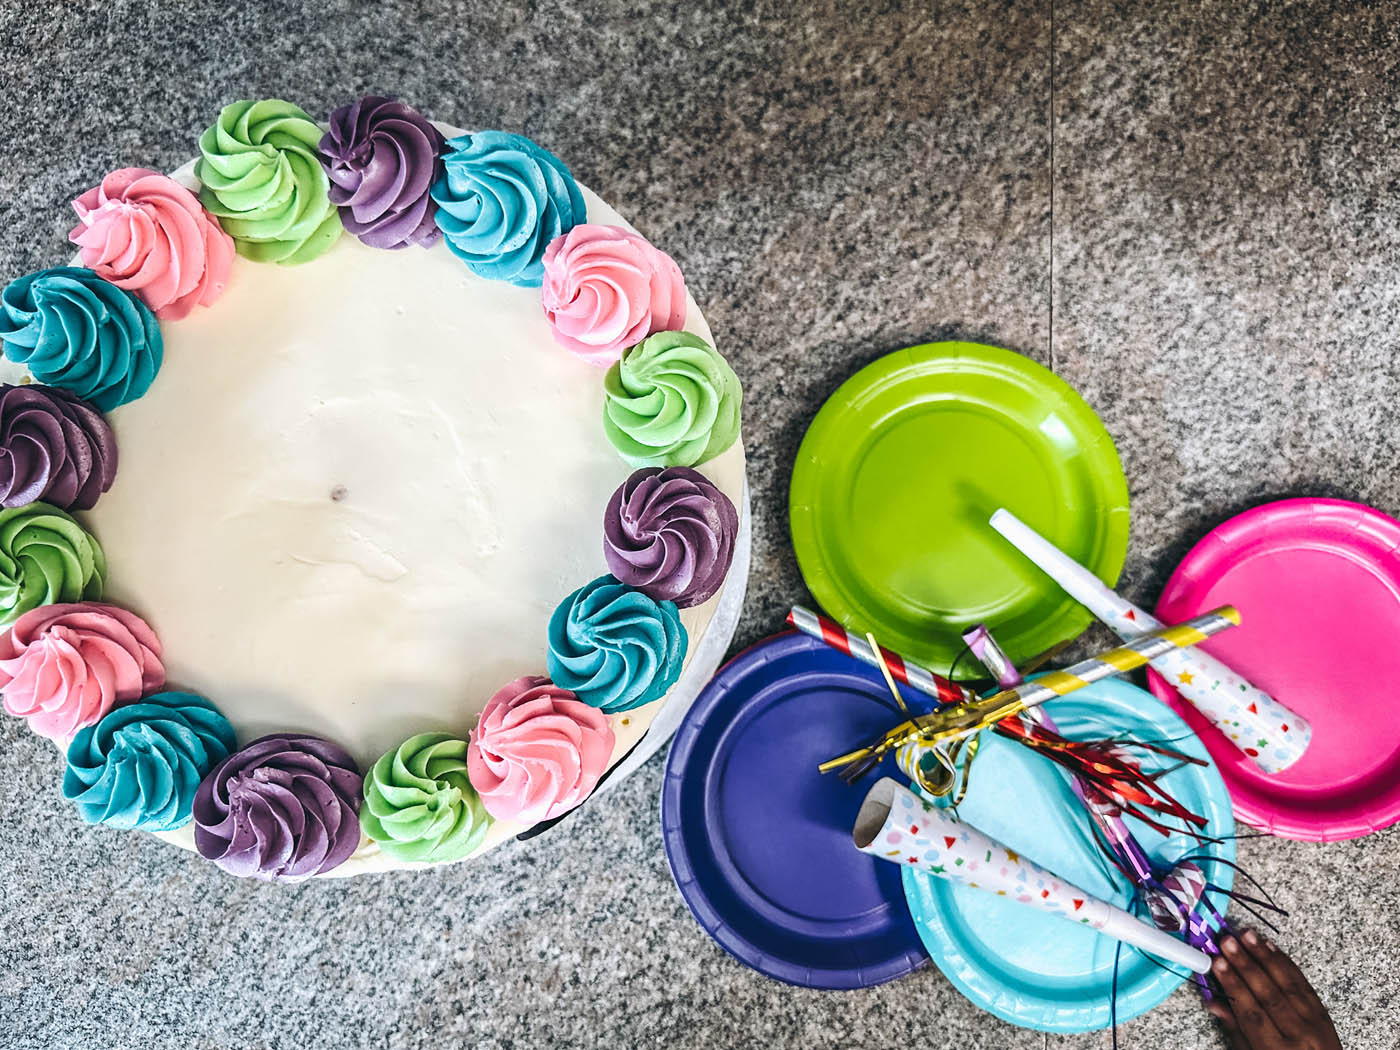 A cake and party supplies - party utensil supplies provided at Romp n' Roll toddler birthday venues in Raleigh, NC.